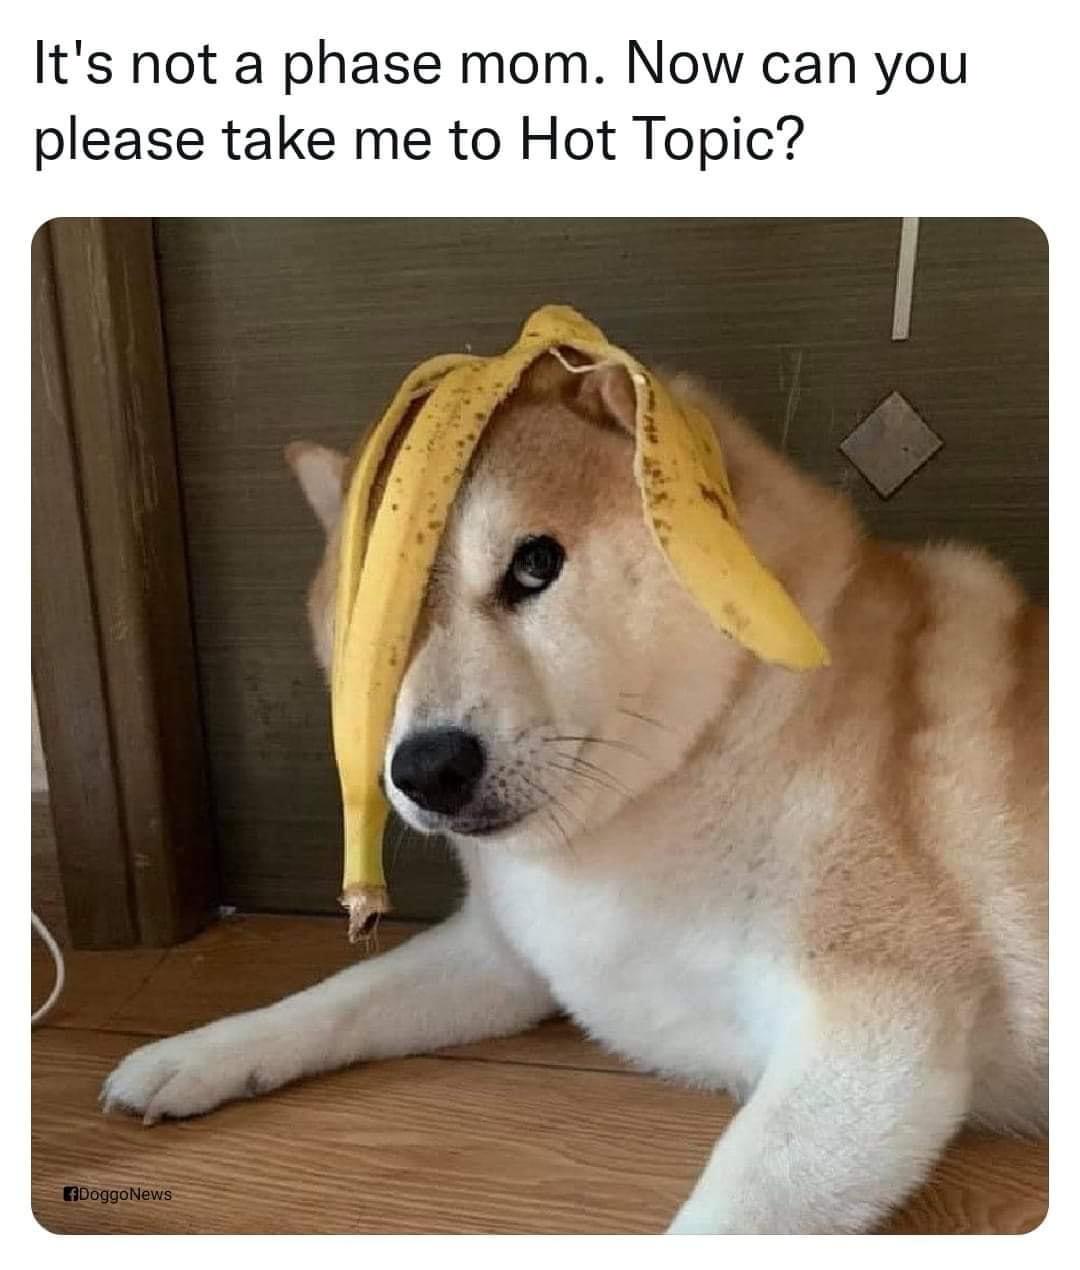 dog - It's not a phase mom. Now can you please take me to Hot Topic? DoggoNews